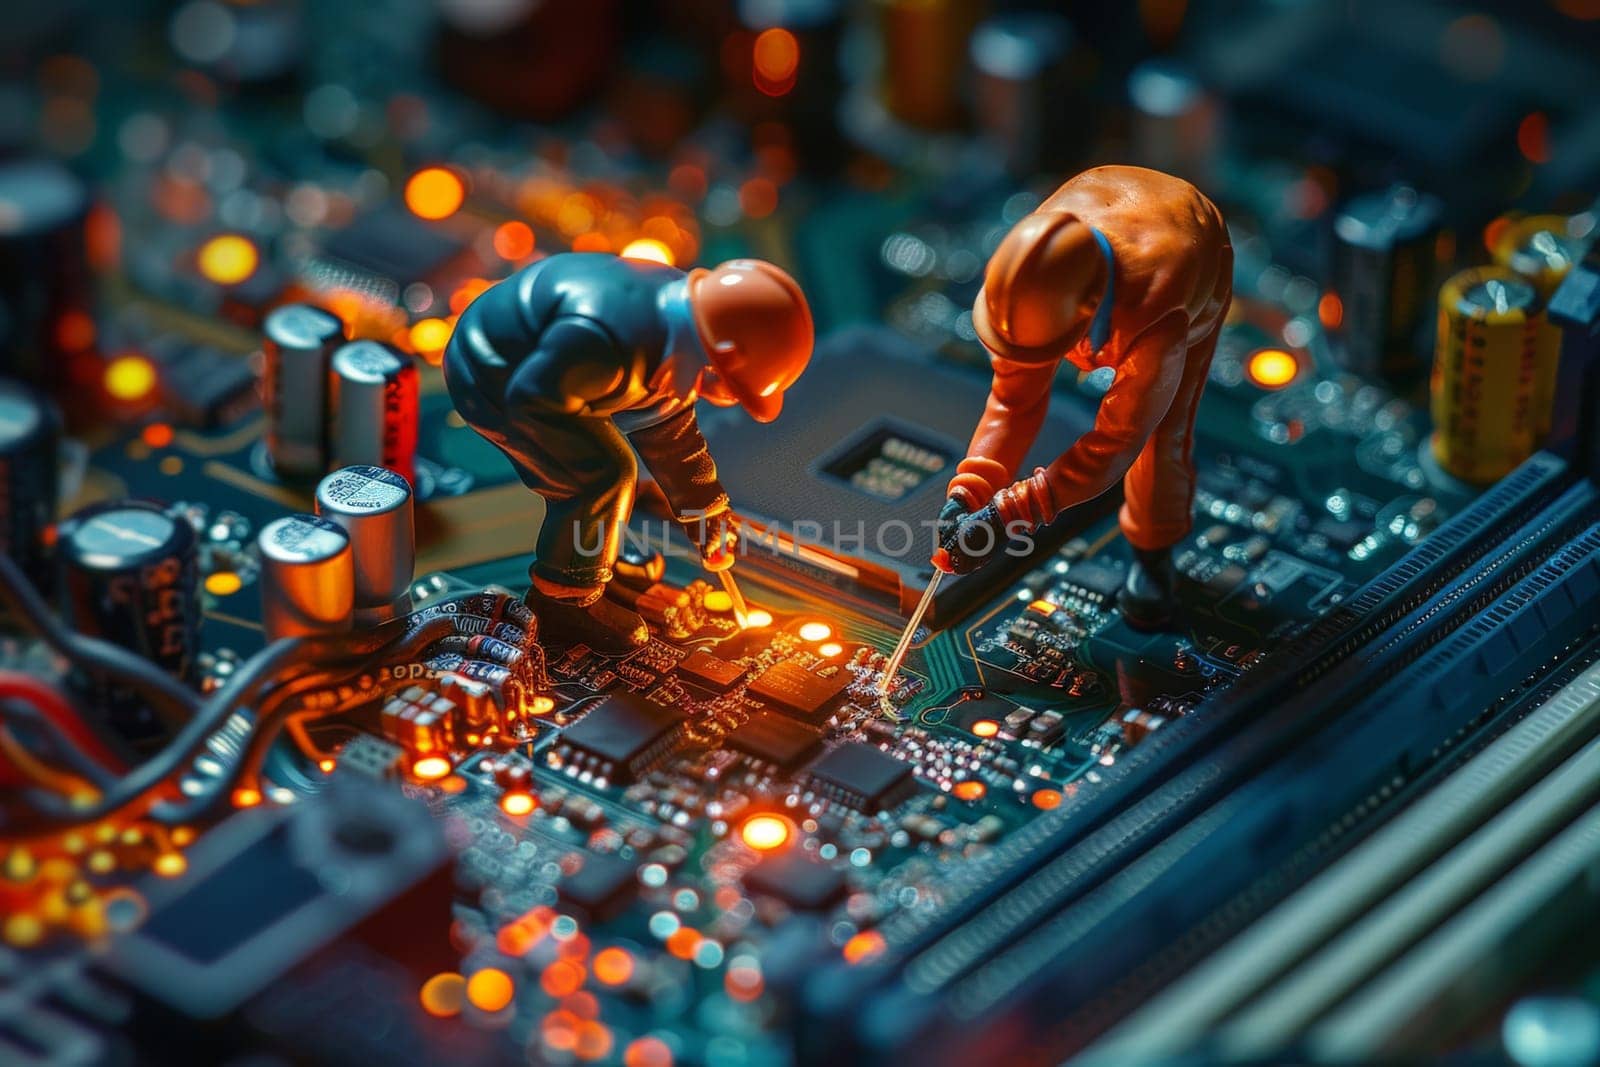 Miniature model, Miniature engineer cleaners working together on a circuit board, Computer repair by nijieimu